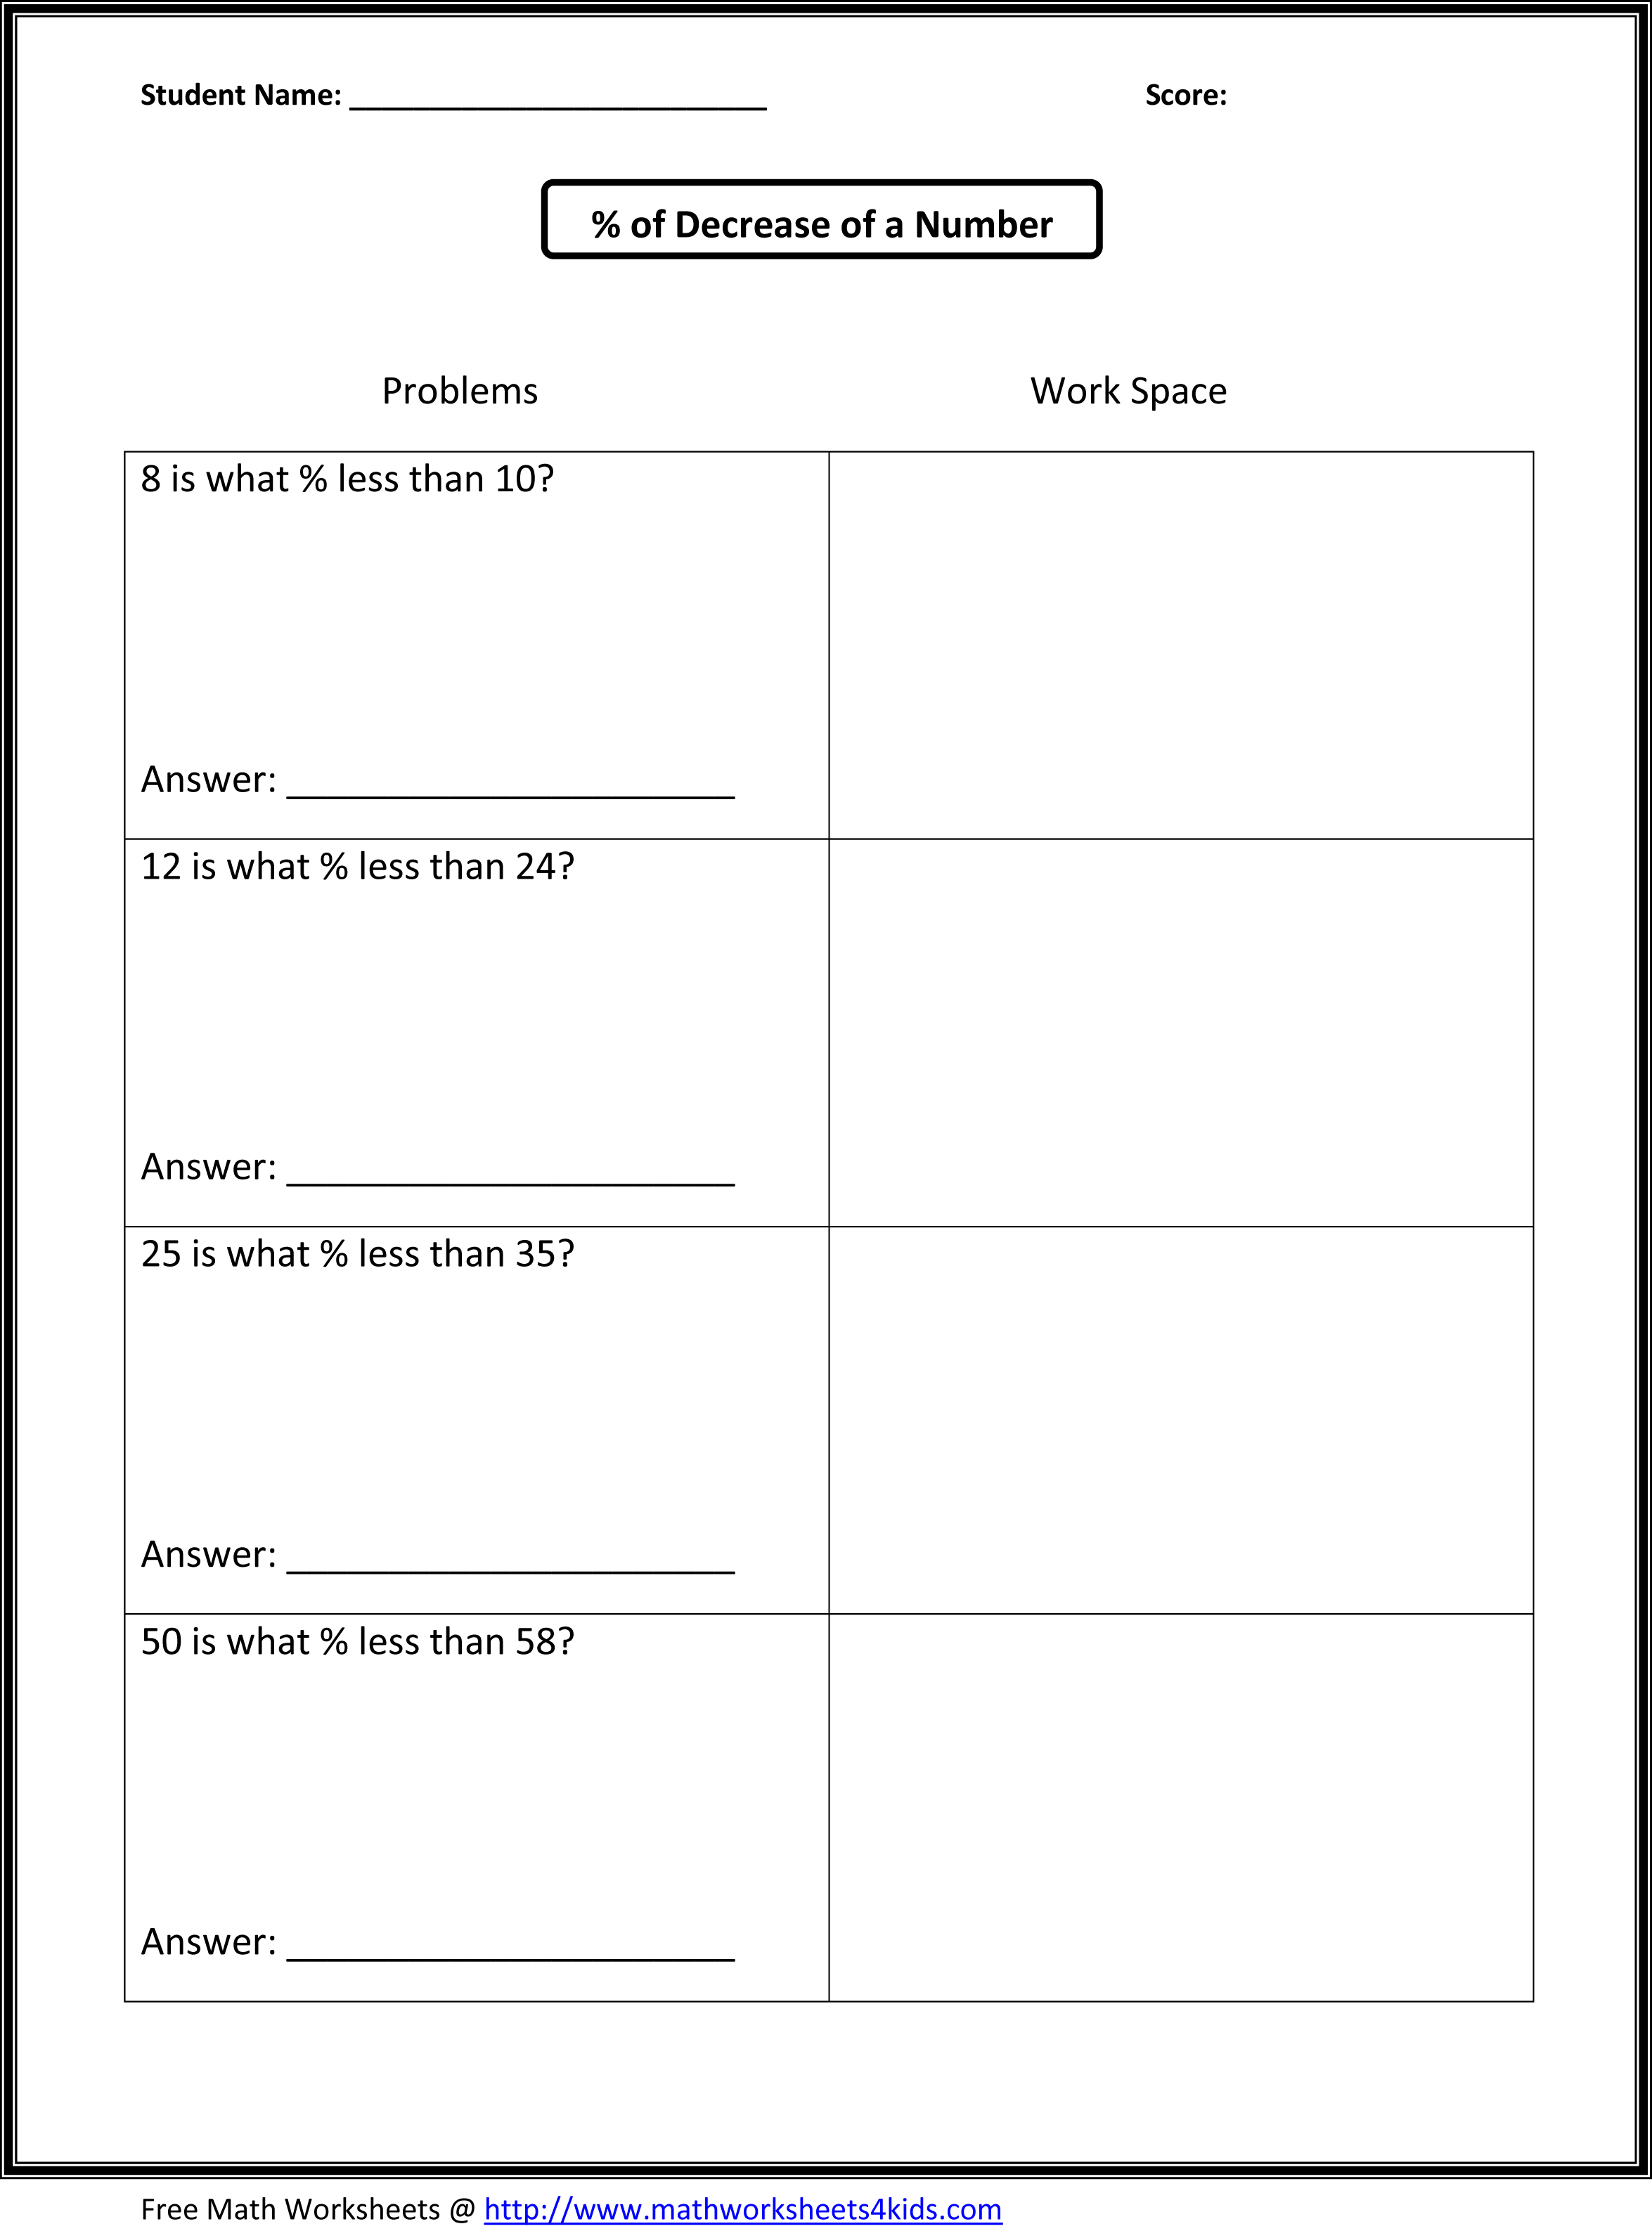 11 Best Images of Blank Pie -Chart Worksheet - 7th Grade ...